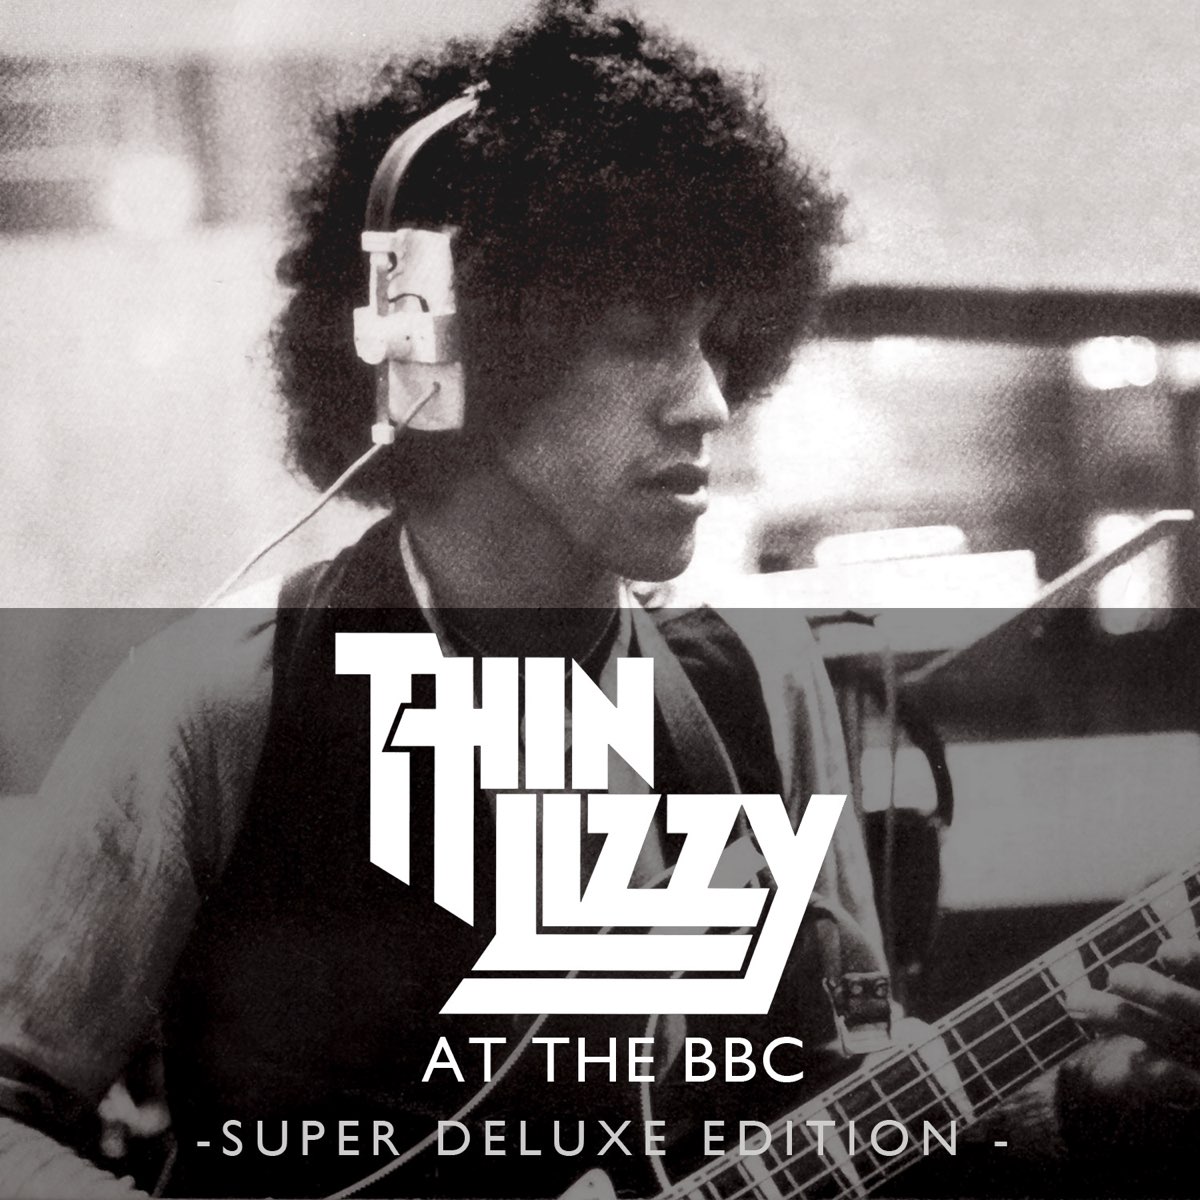 ‎Live At the BBC (Super Deluxe Edition) - Album by Thin Lizzy - Apple Music